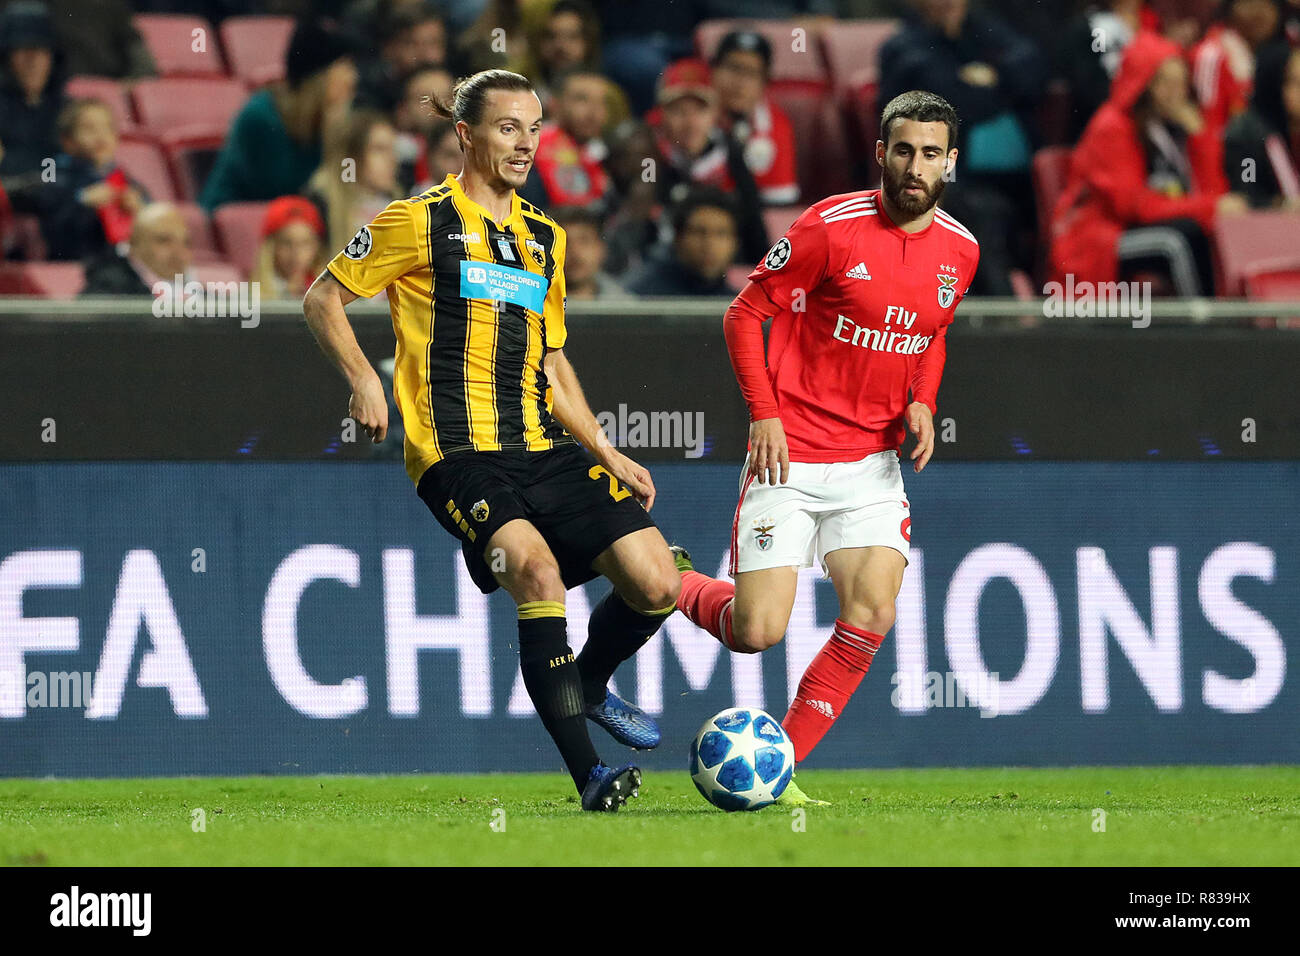 Niklas Hult of AEK Athens F.C. (L) vies for the ball with Rafa Silva of SL  Benfica (R) during the UEFA Champions League 2018/19 football match between  SL Benfica vs AEK Athens